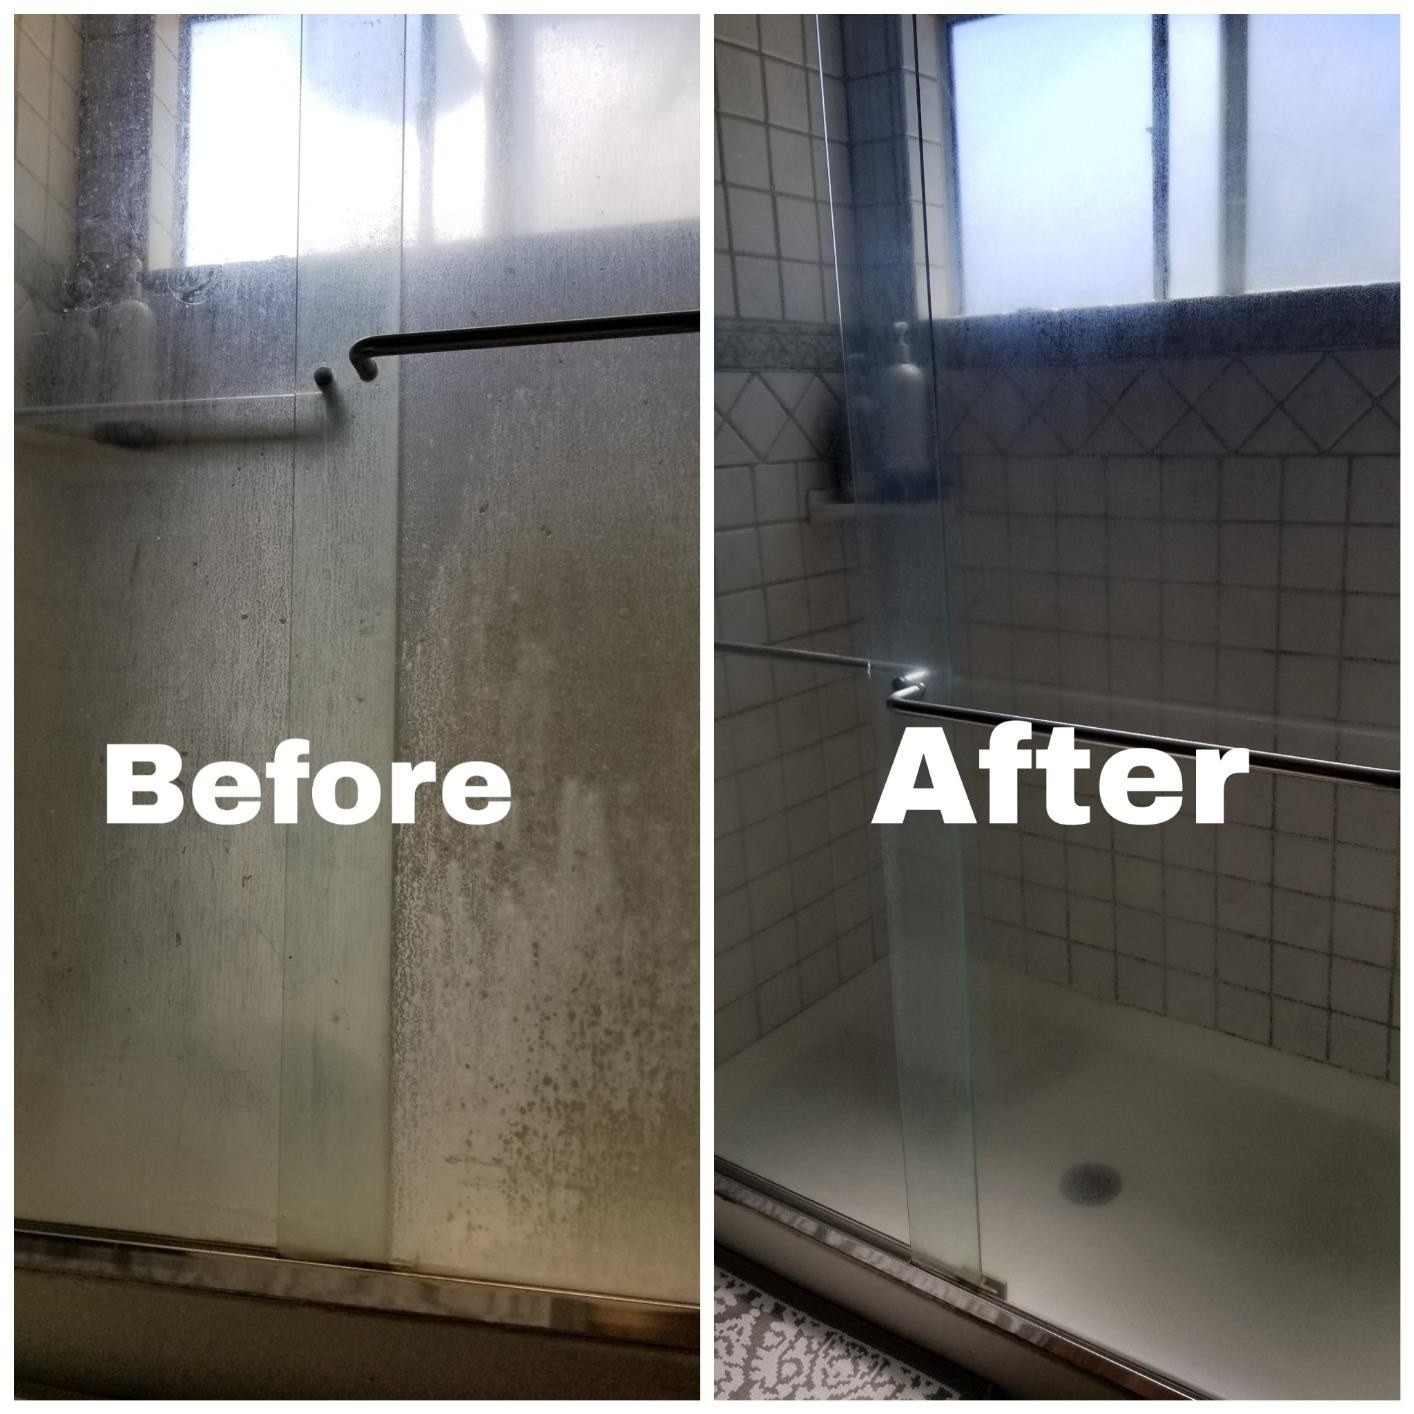 Before photo of a glass shower door with hard water stain and after photo of the same door, which is now free of water stains